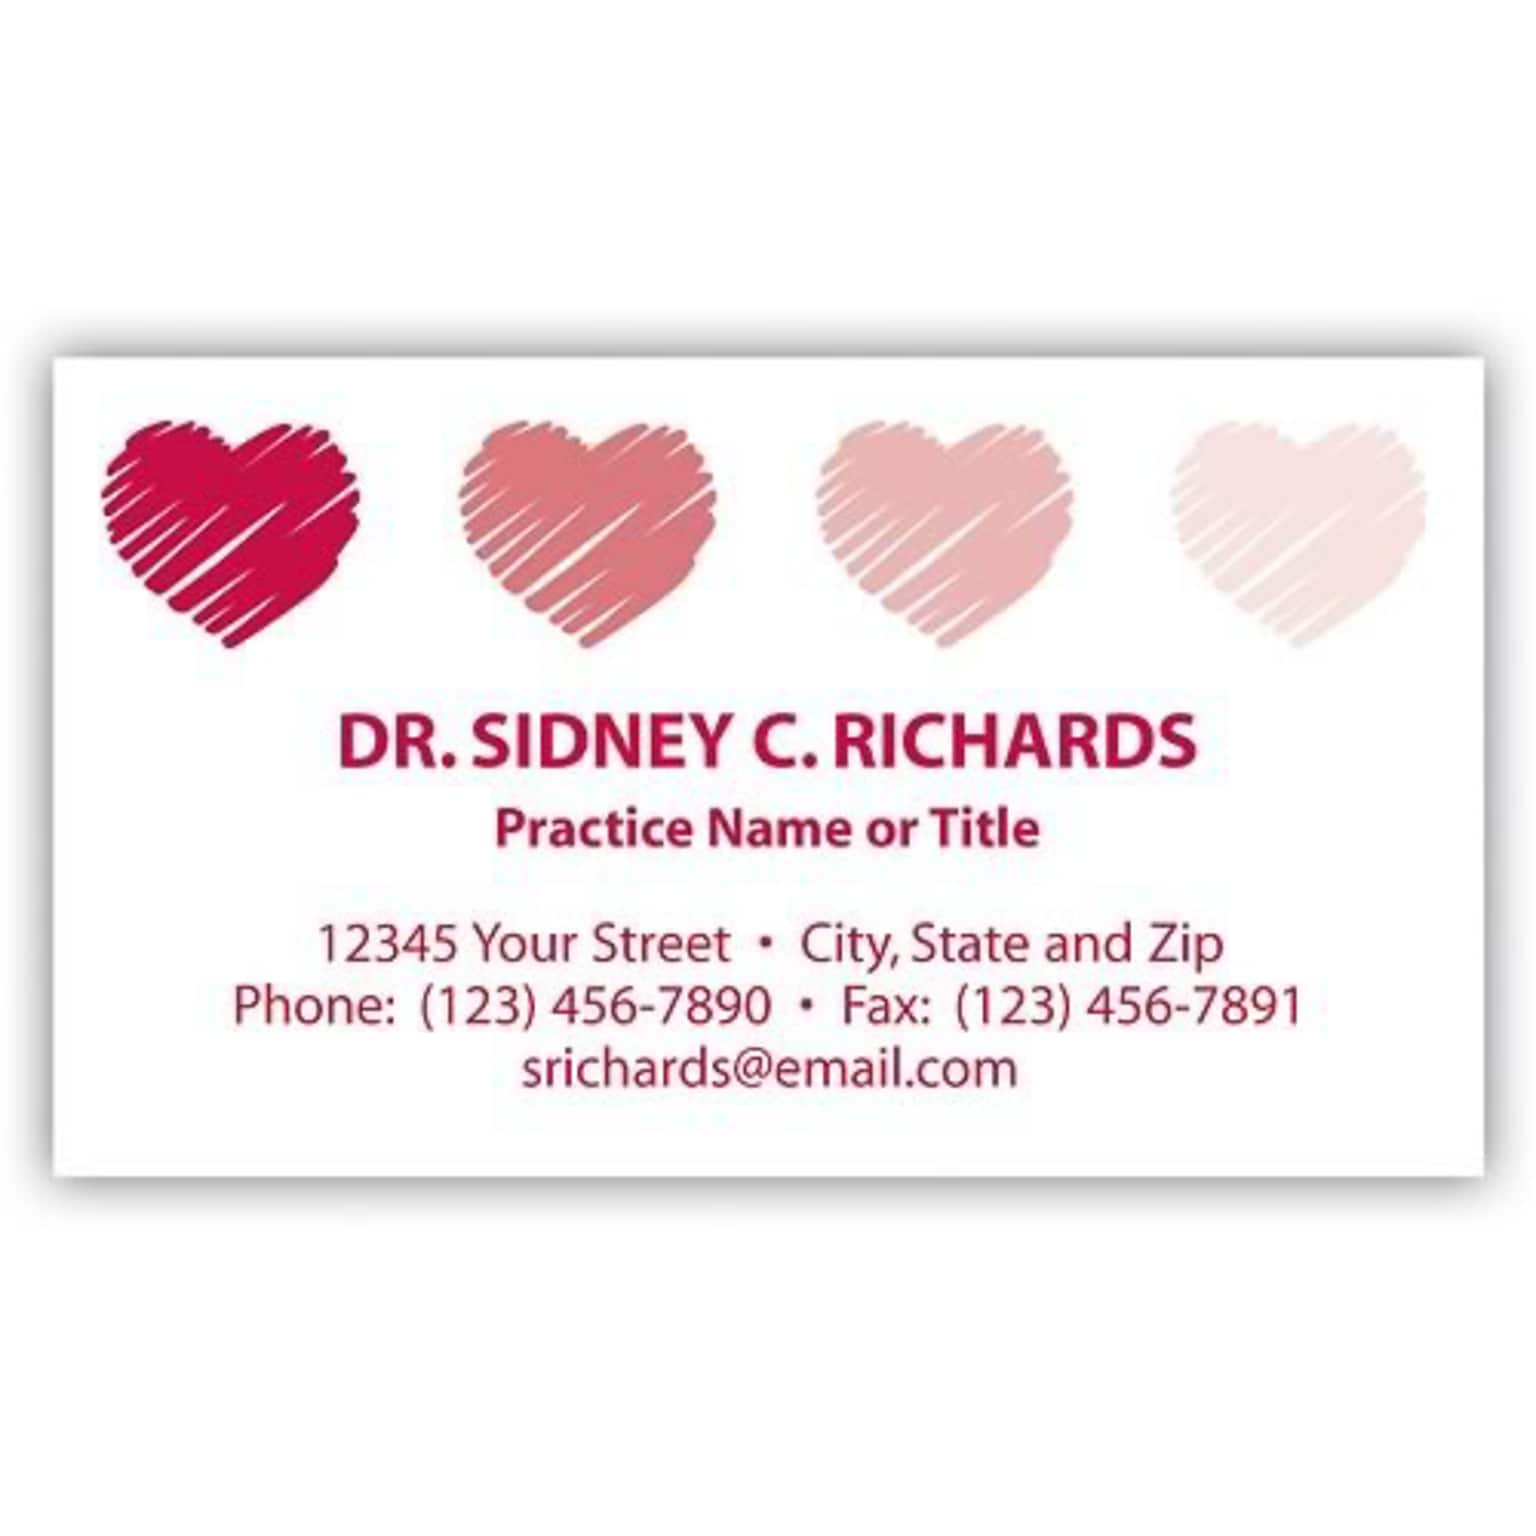 Custom 1-2 Color Business Cards, CLASSIC® Laid Solar White 80#, Raised Print, 1 Standard Ink, 1-Sided, 250/PK